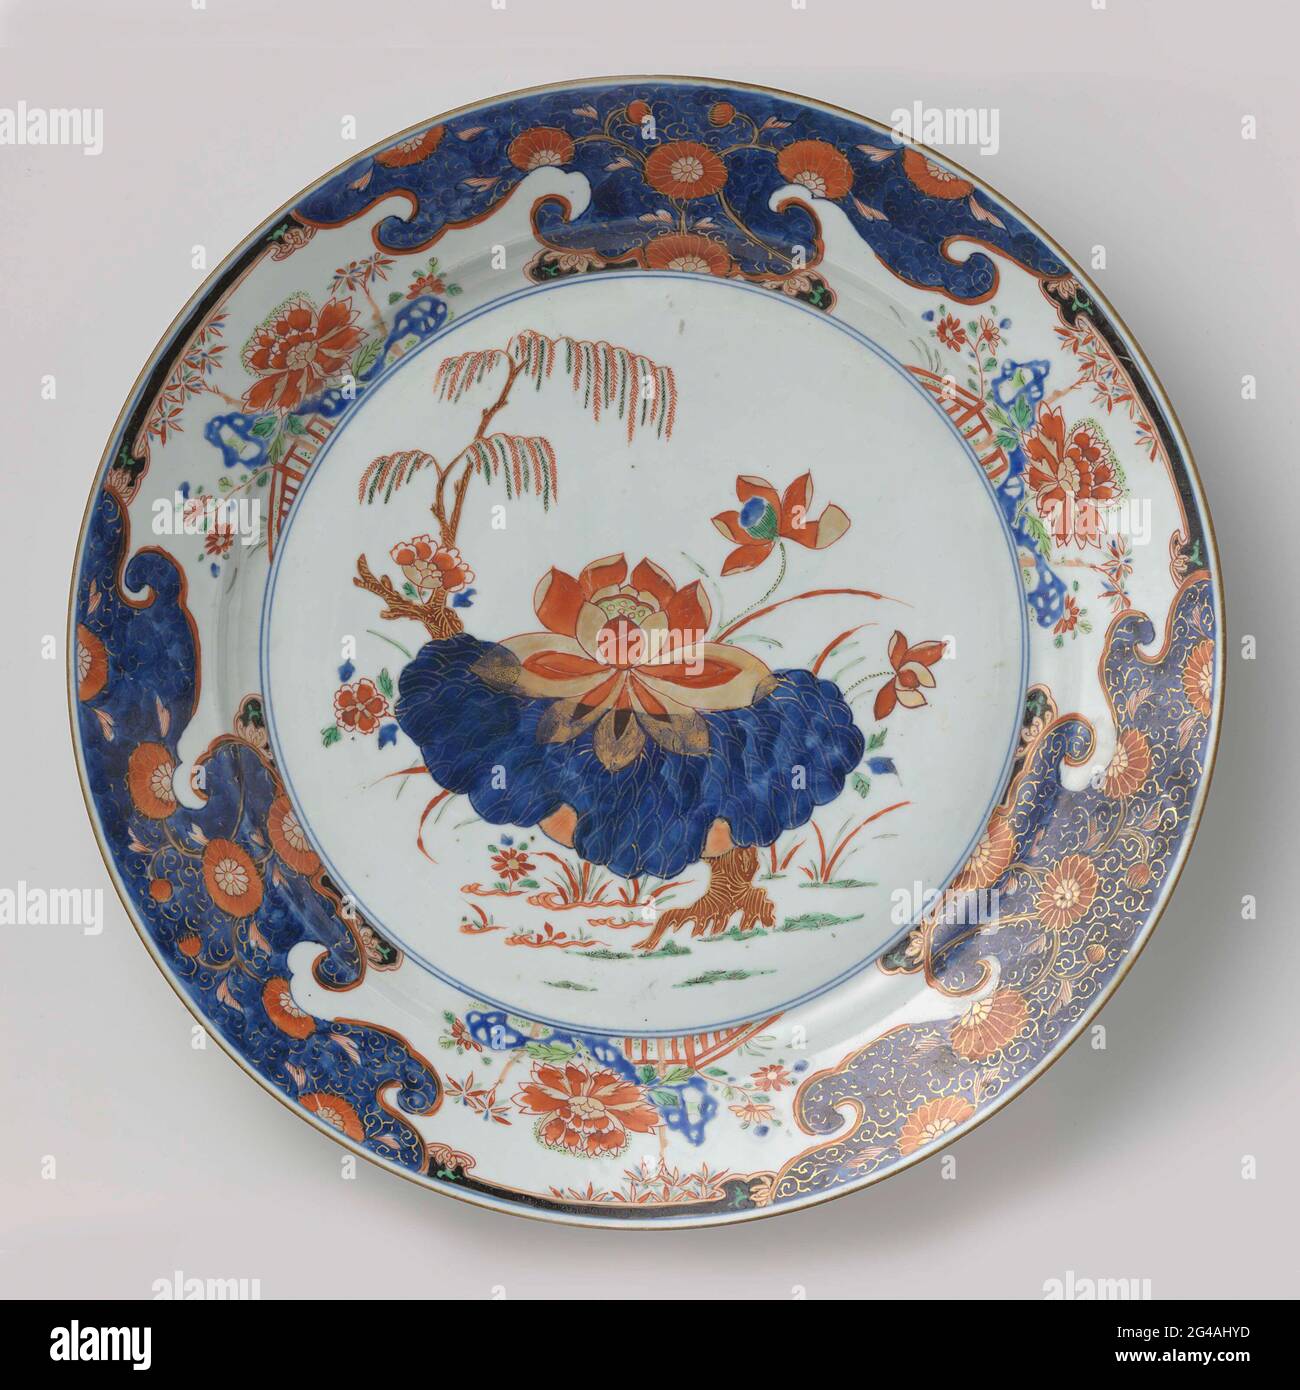 Dish with Large Lotus, Weeping Willow and Plants. Dish of porcelain, painted in underglaze blue and on the glaze blue, red, green, black and gold. On the flat a large lotus plant and a weeping willow; On the wall and edge four groups with a rock, fence and flowering plants such as Japanese aster, peony and bamboo; above these groups each time a band with lotus drinks against a black soil; Between the groups a box with curl work and chrythanity against a blue ground. Chinese Imari. Stock Photo